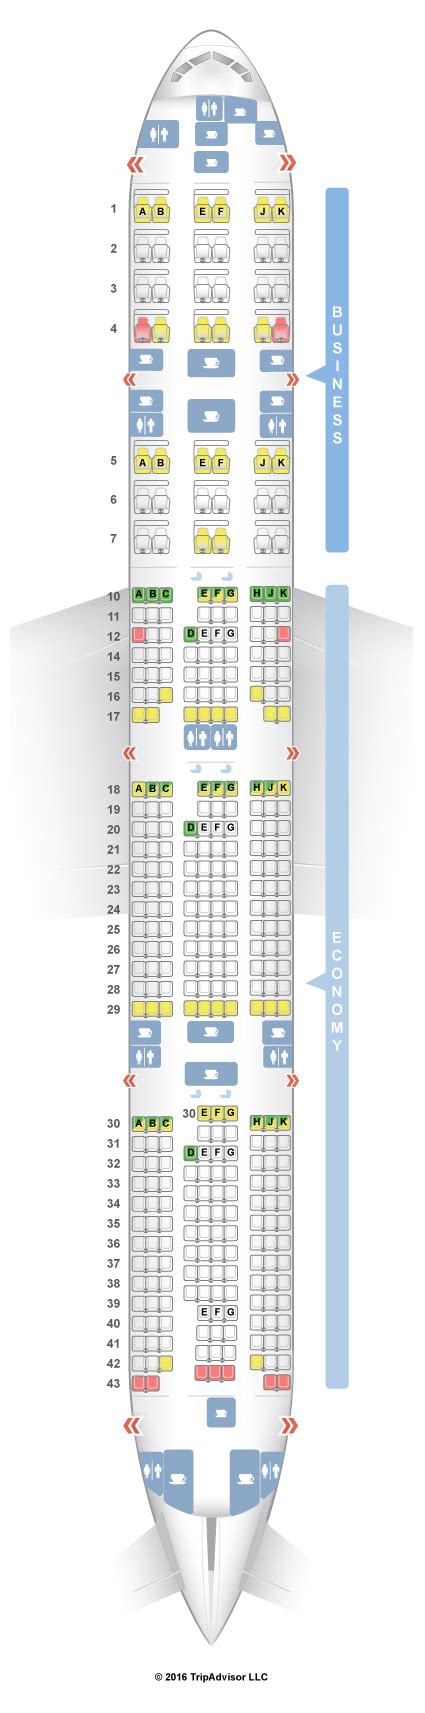 Yes. Detailed seat map Qatar Airways Boeing B777 200LR 259pax. Find the best airplanes seats, information on legroom, recline and in-flight entertainment using our detailed online seating charts.. 